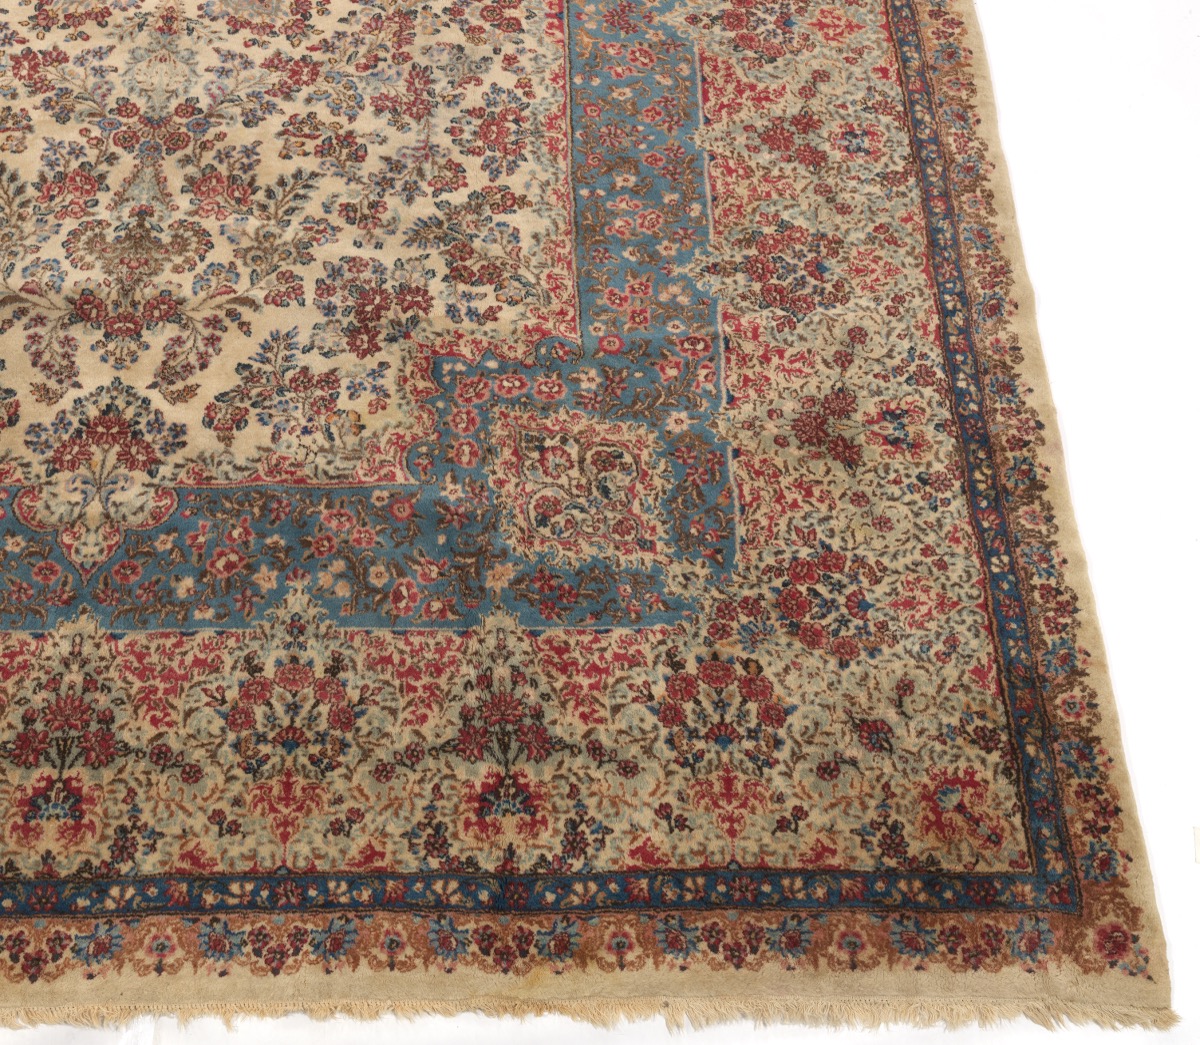 Very Fine Near Antique Hand Knotted Lavar Kerman Palace Size Carpet, ca. 1930's/40's - Image 2 of 9